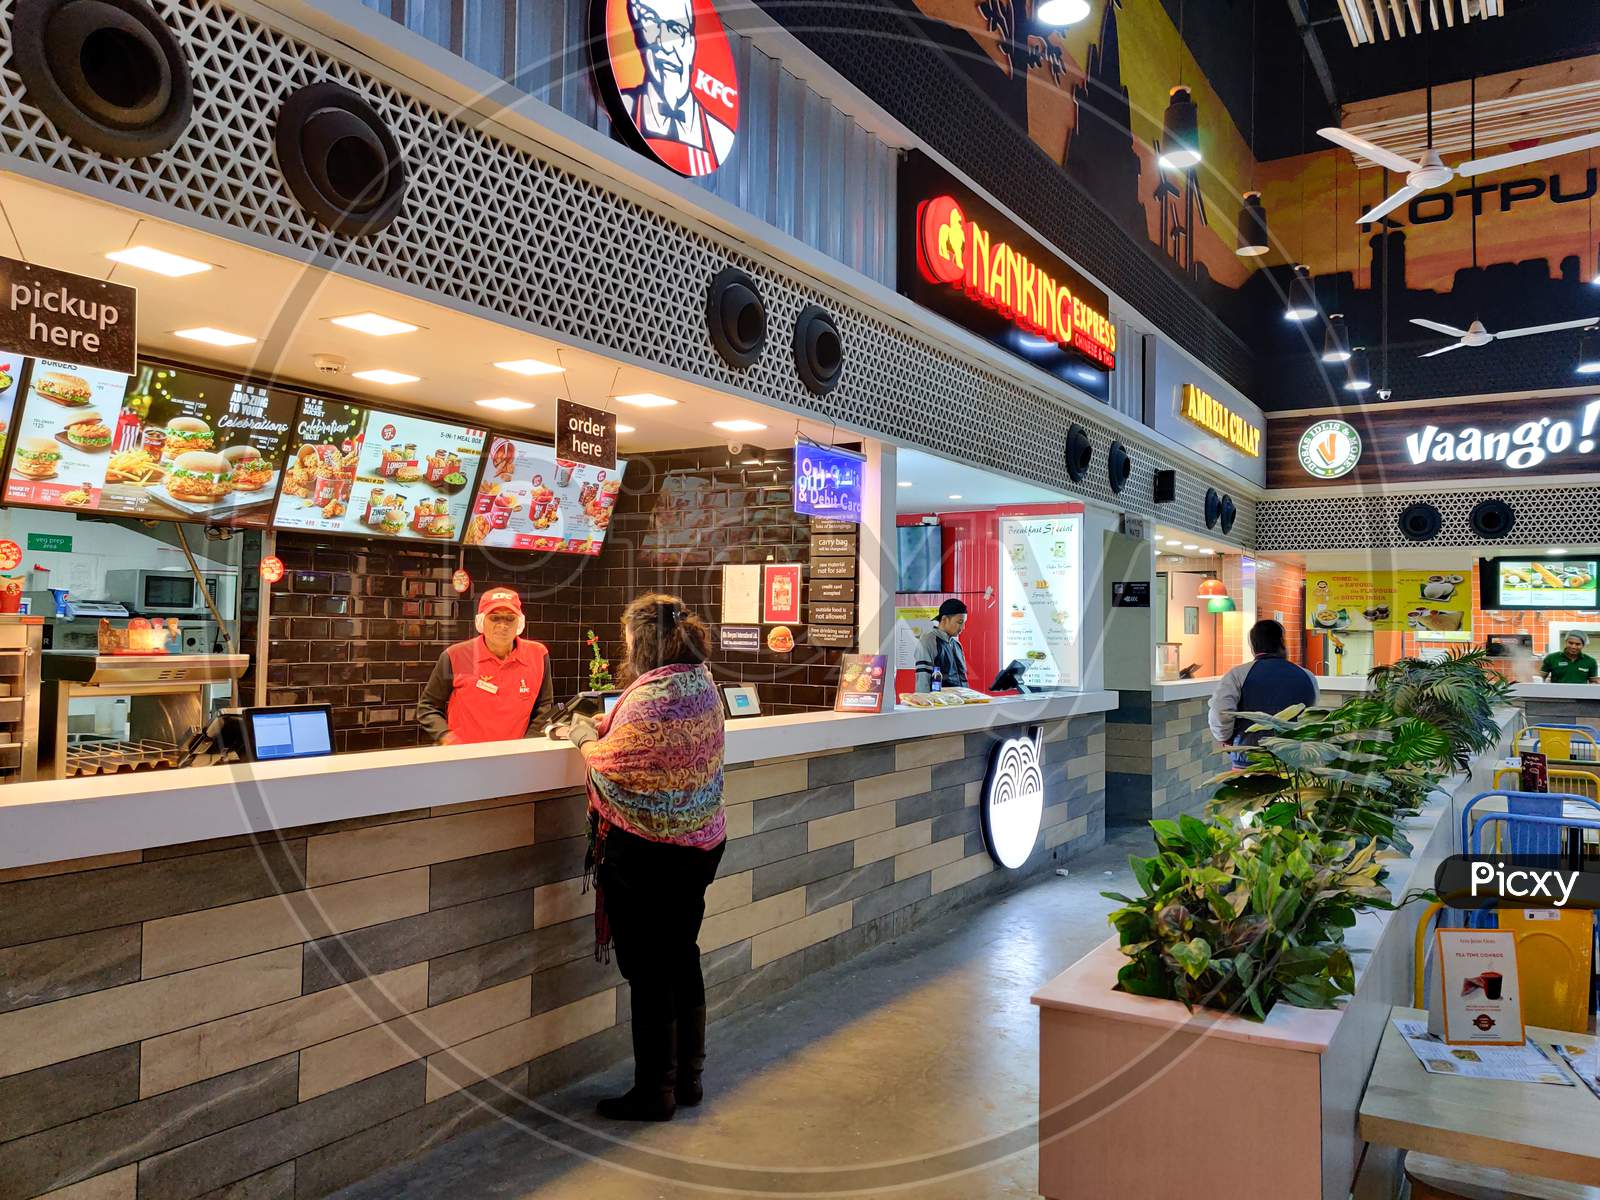 Young Indian Woman Ordering Food At A Deserted Food Court Due To The Coronavirus Pandemic Covid19 As Things Open Up With Major Brands Like Kfc, Vaango